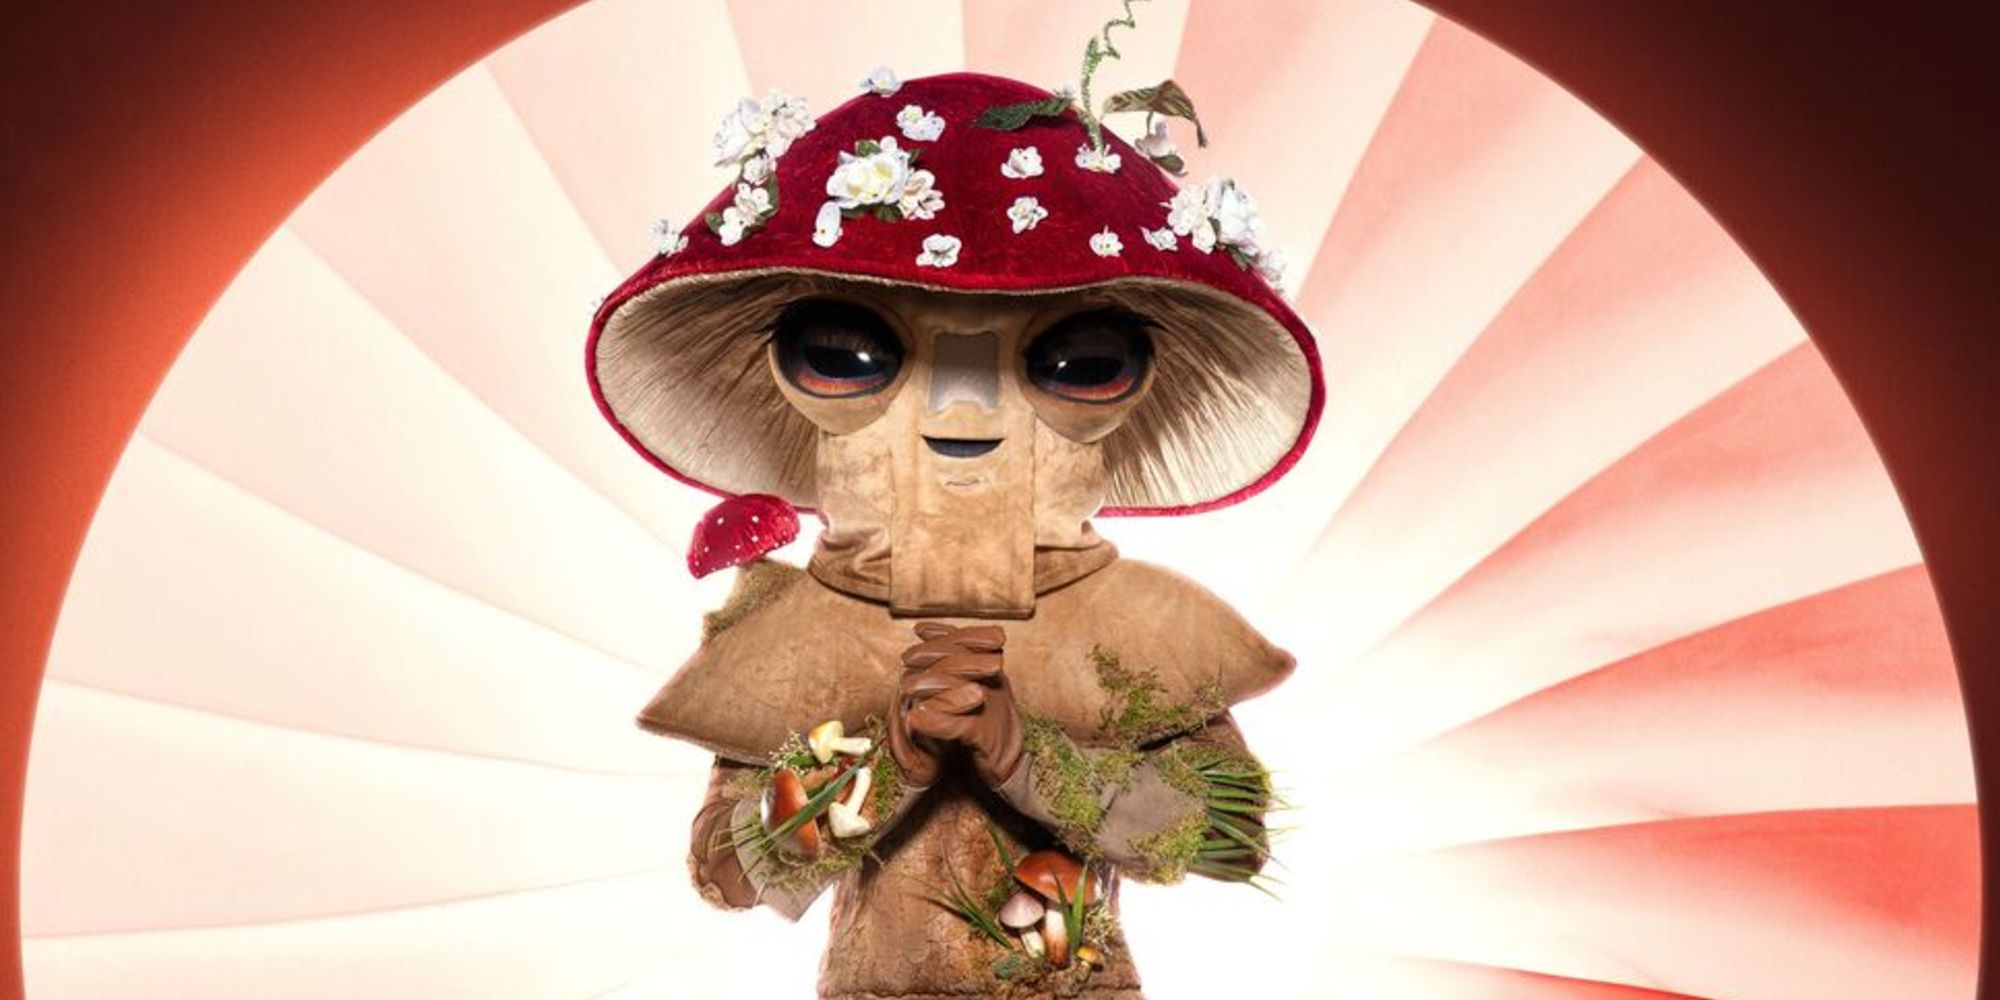 Promo image for the Mushroom in The Masked Singer